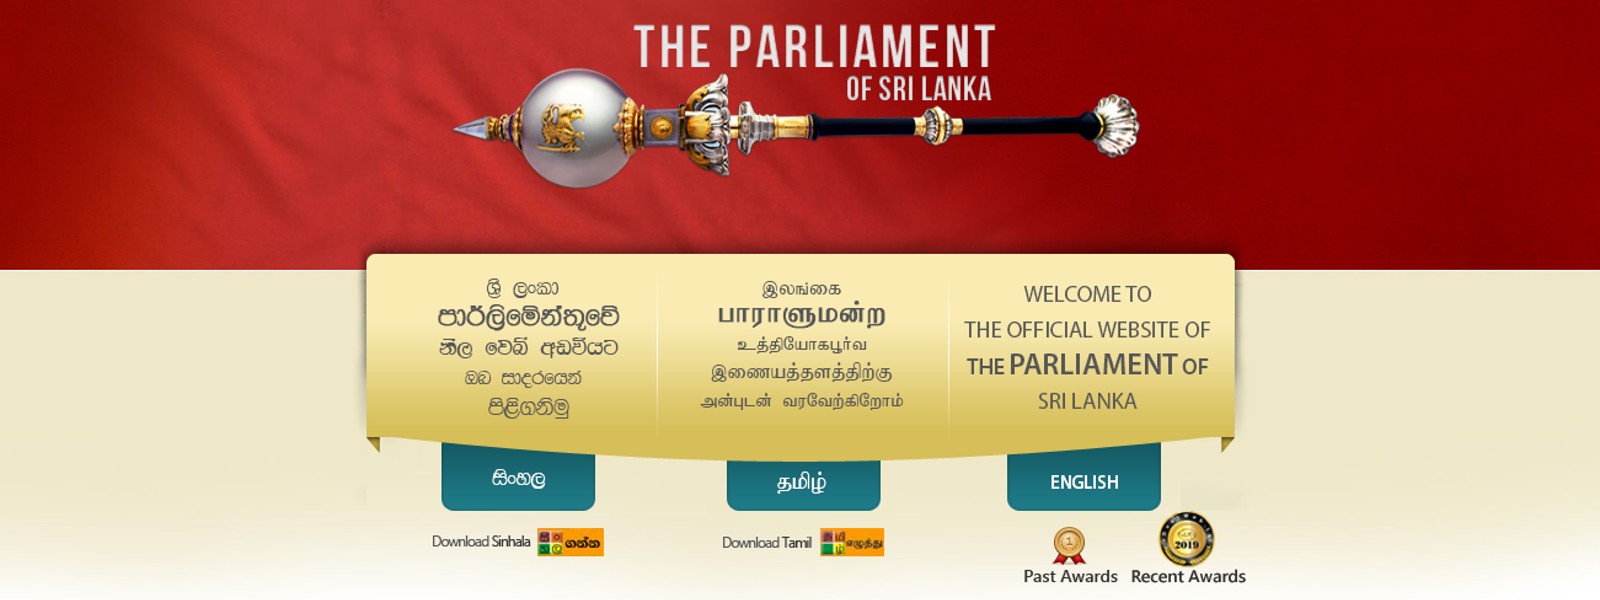 MPs addresses deleted from Parliament website